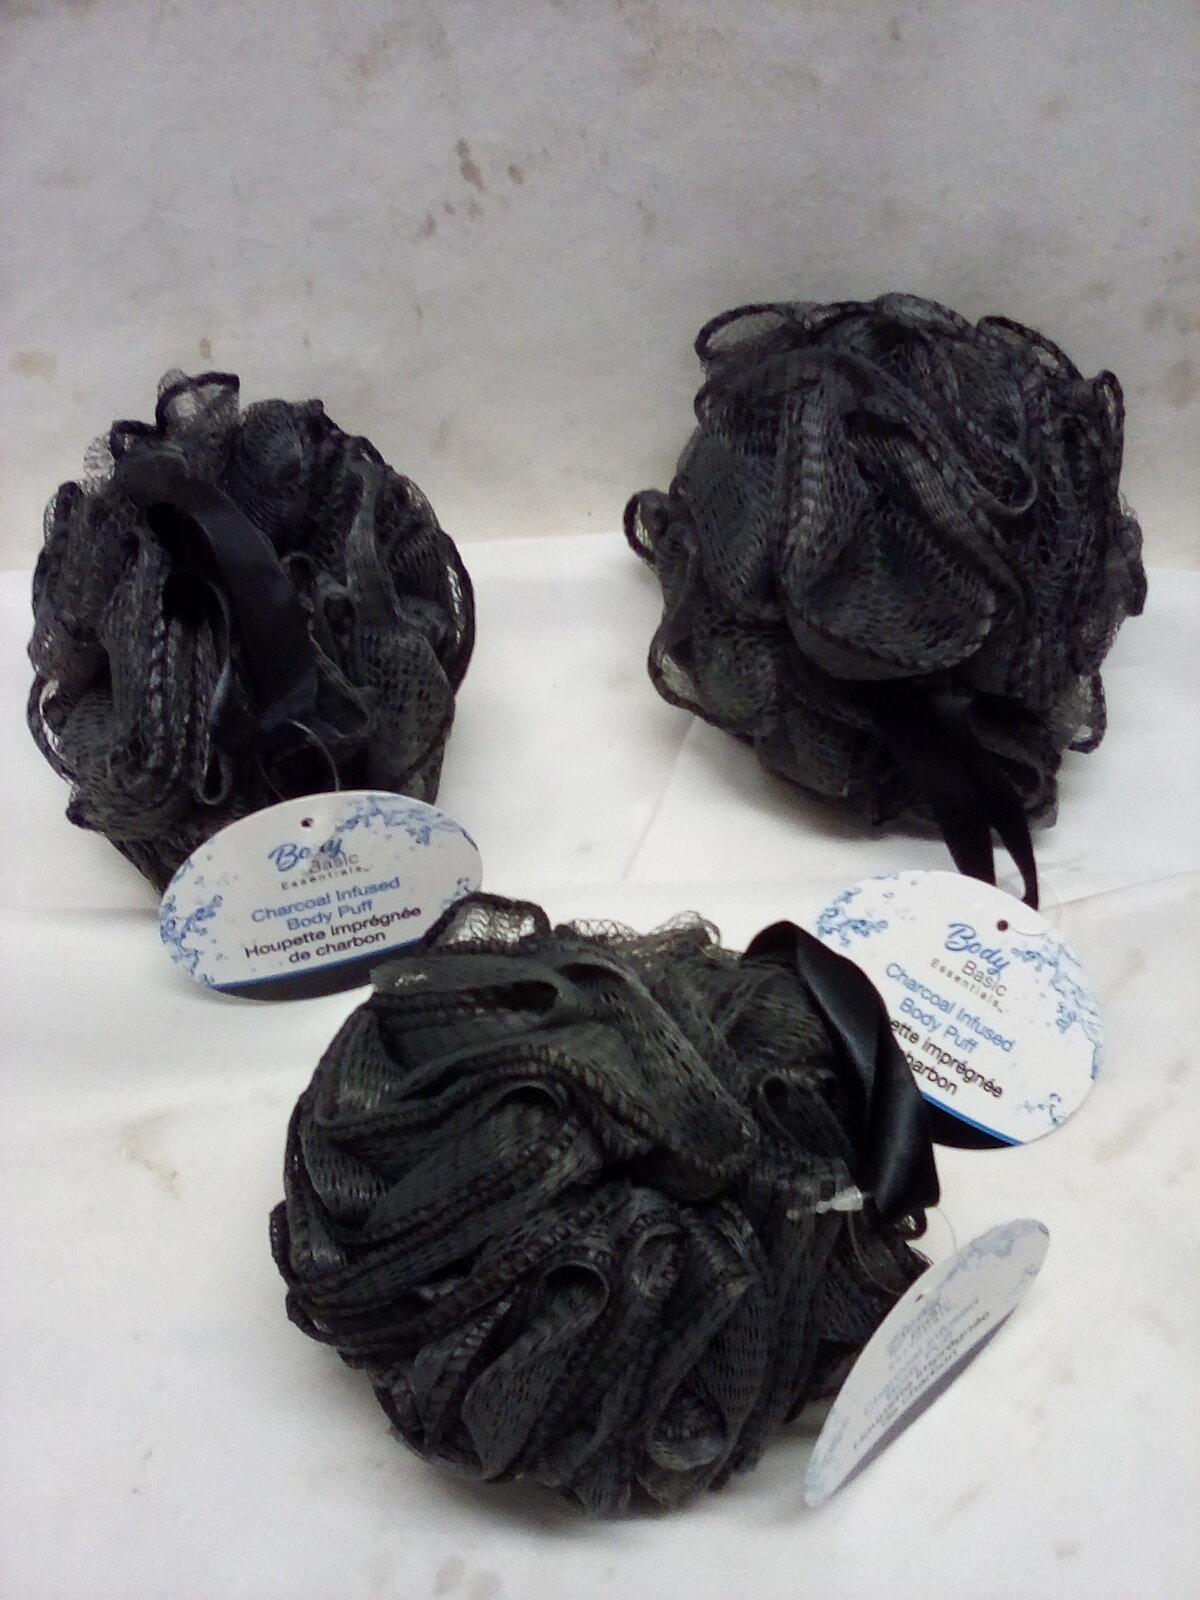 Qty 3 Charcoal Infused Body Puffs.